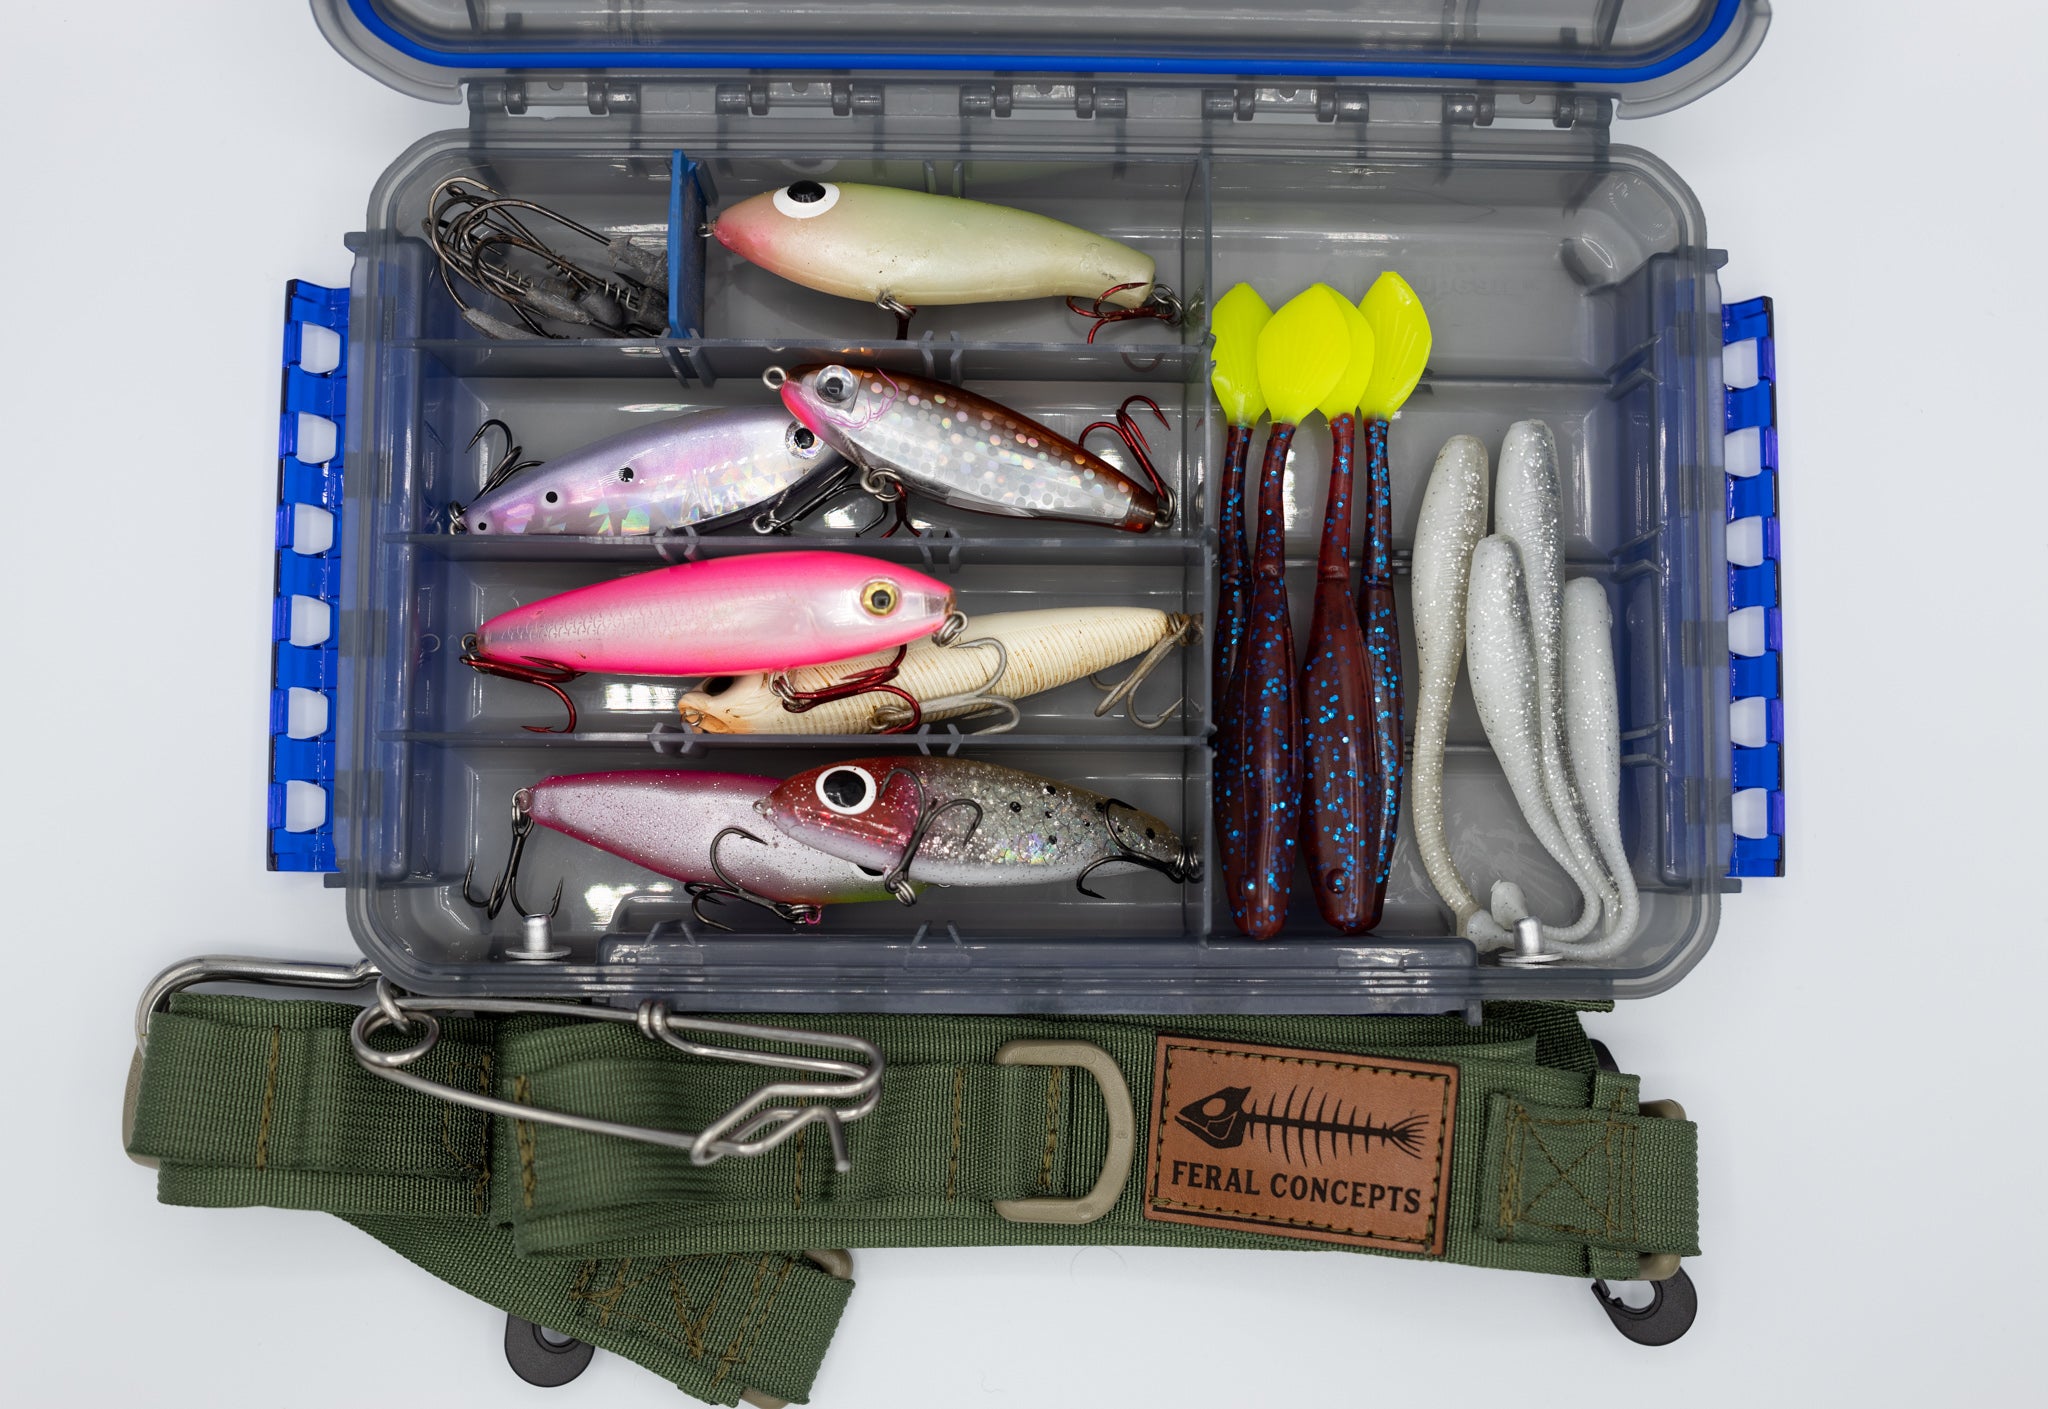 Fishing Box for Baits Plastic Lure Boxes Fly Rock Fishing Tackle